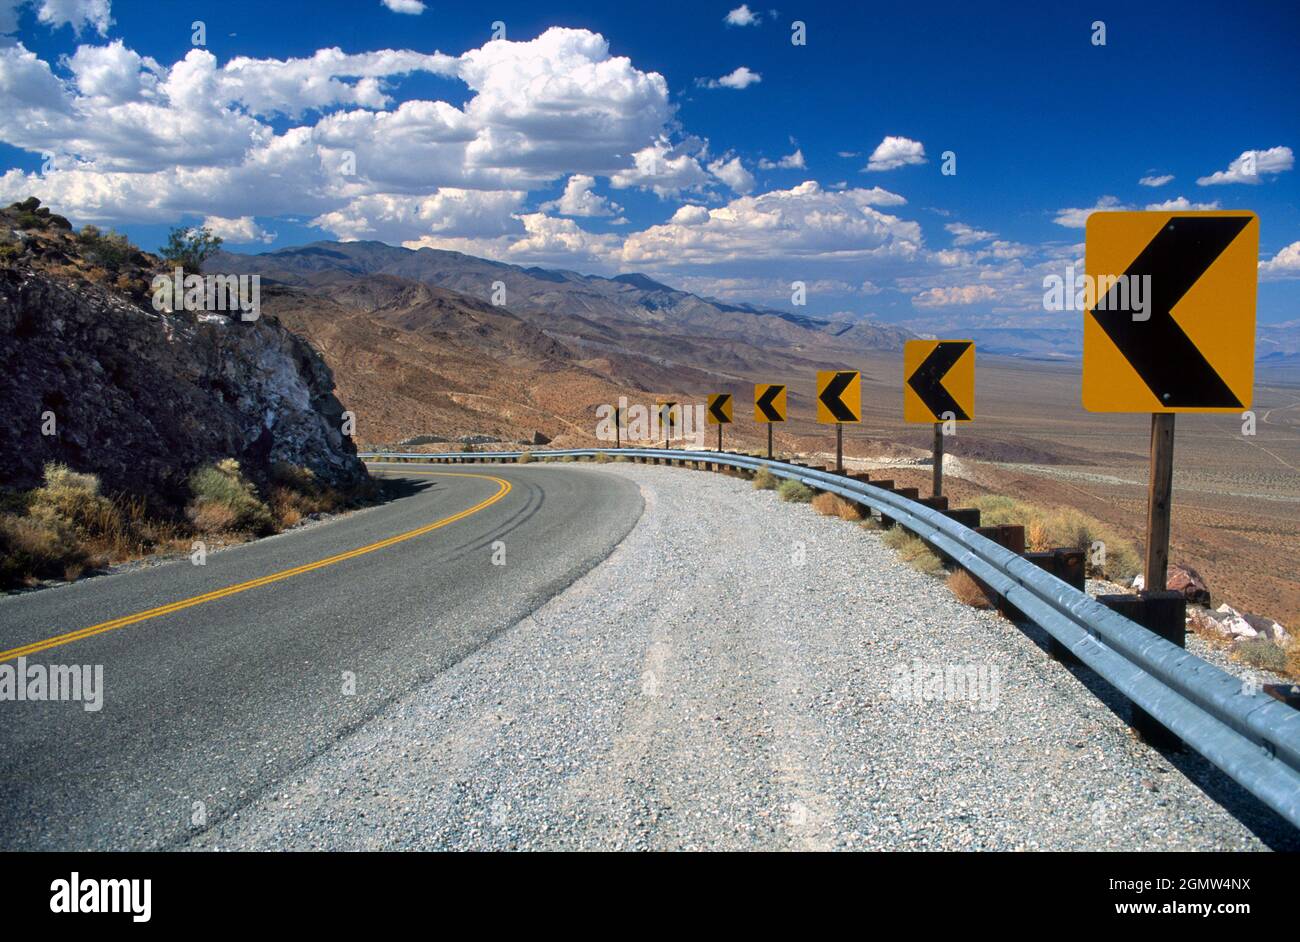 Death Valley, California - October 1985; Deserted, searing hot highway in Death Valley, close to the iconic Zabriskie Point. Stock Photo